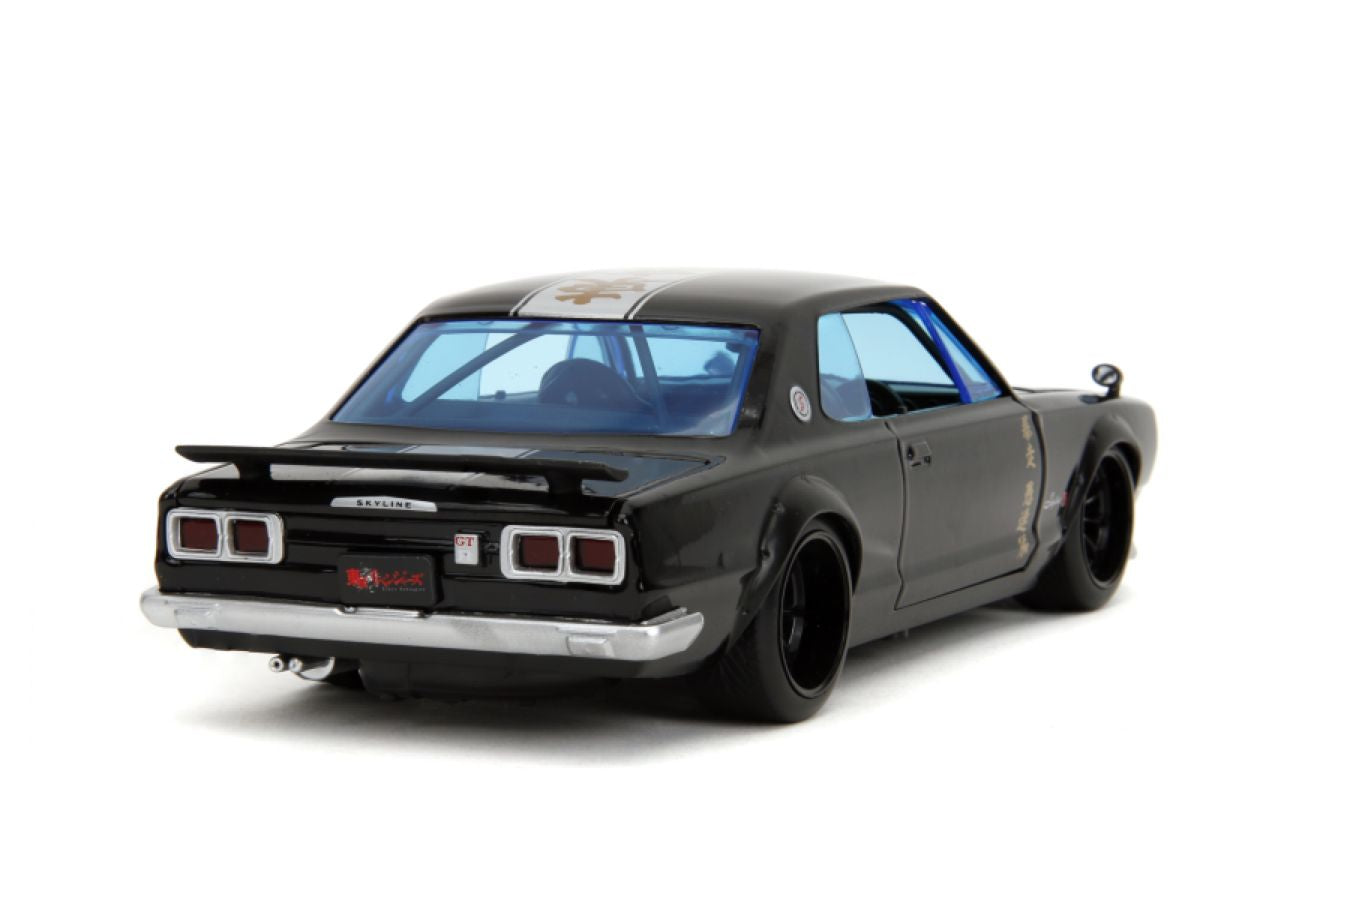 Tokyo Revengers - 1971 Nissan Skyline GTR with Mikey 1:24 Scale Diecast Vehicle